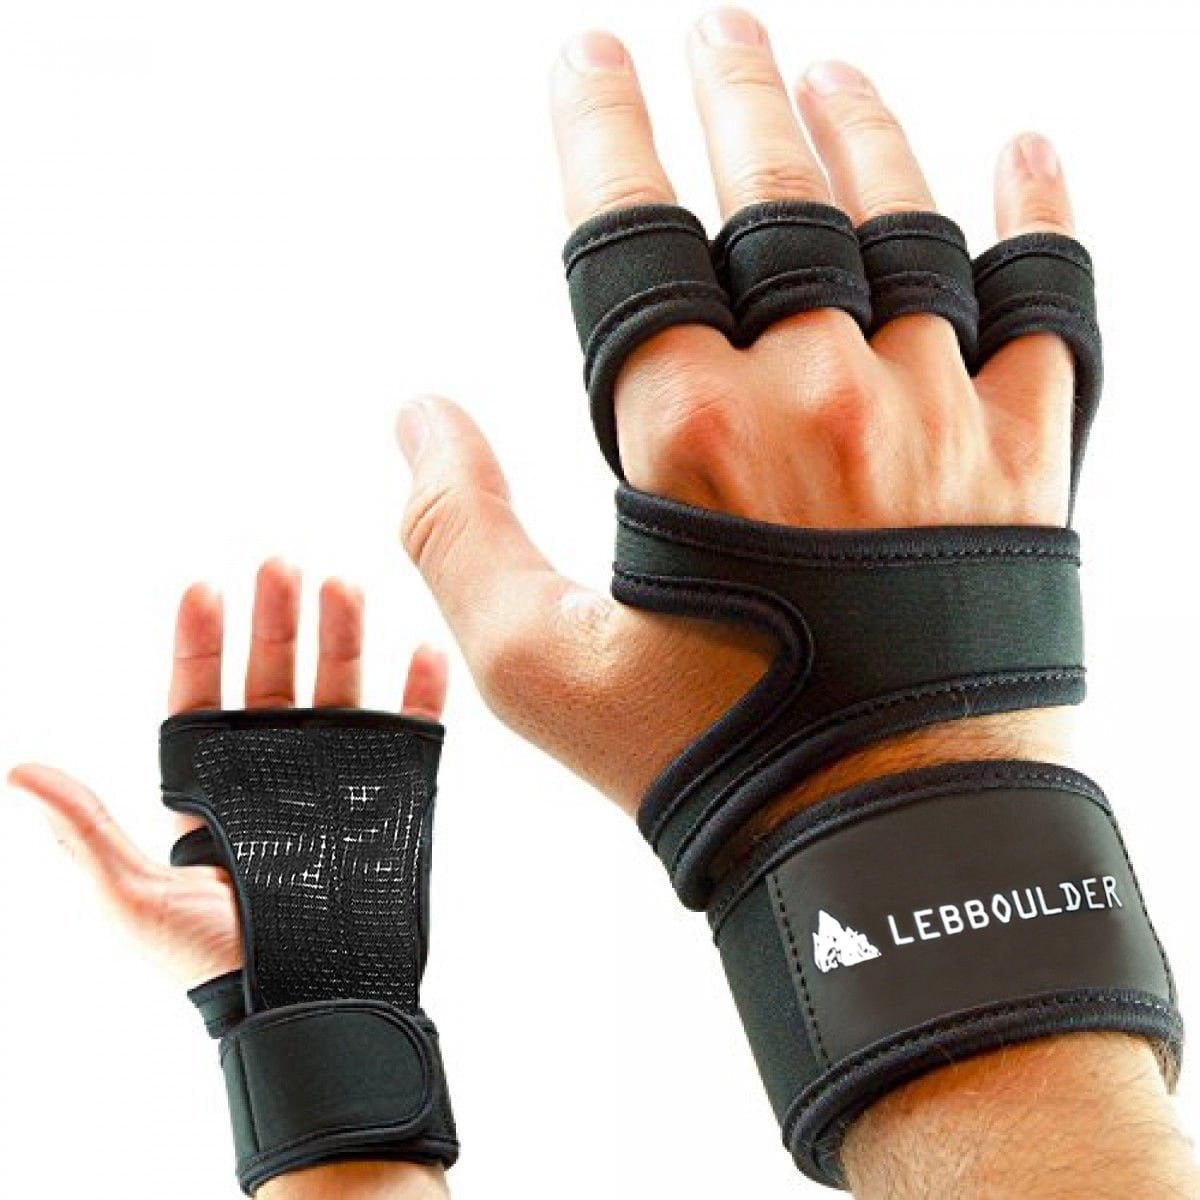 Training Padded Weight Lifting Gym Straps Hand Bar Wrist Support Gloves 